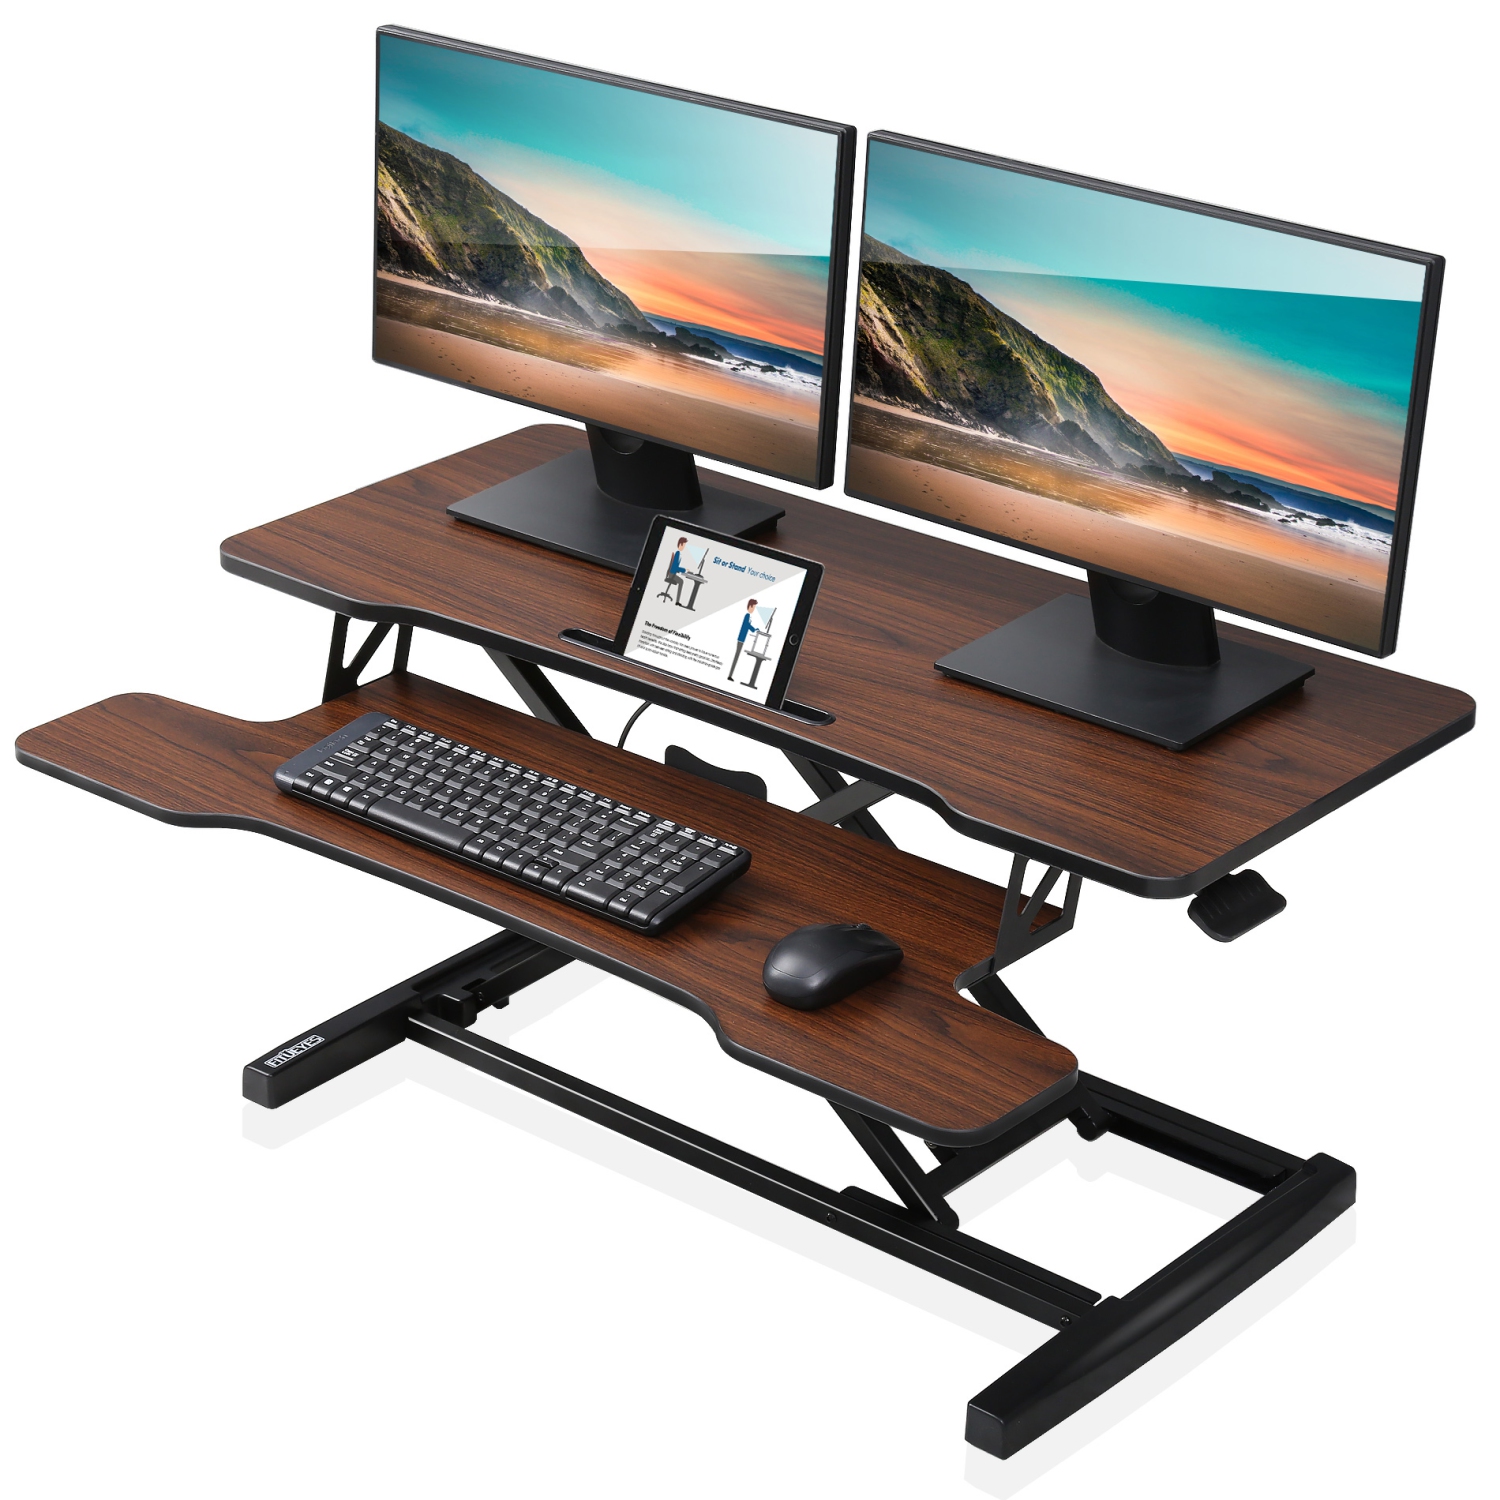 FITUEYES 36 inch Desk Converter, Height Adjustable Sit to Stand Desk Riser, Ergonomic Computer Workstation with Wide Keyboard Tray fit Dual Monitor and Laptop, Brown